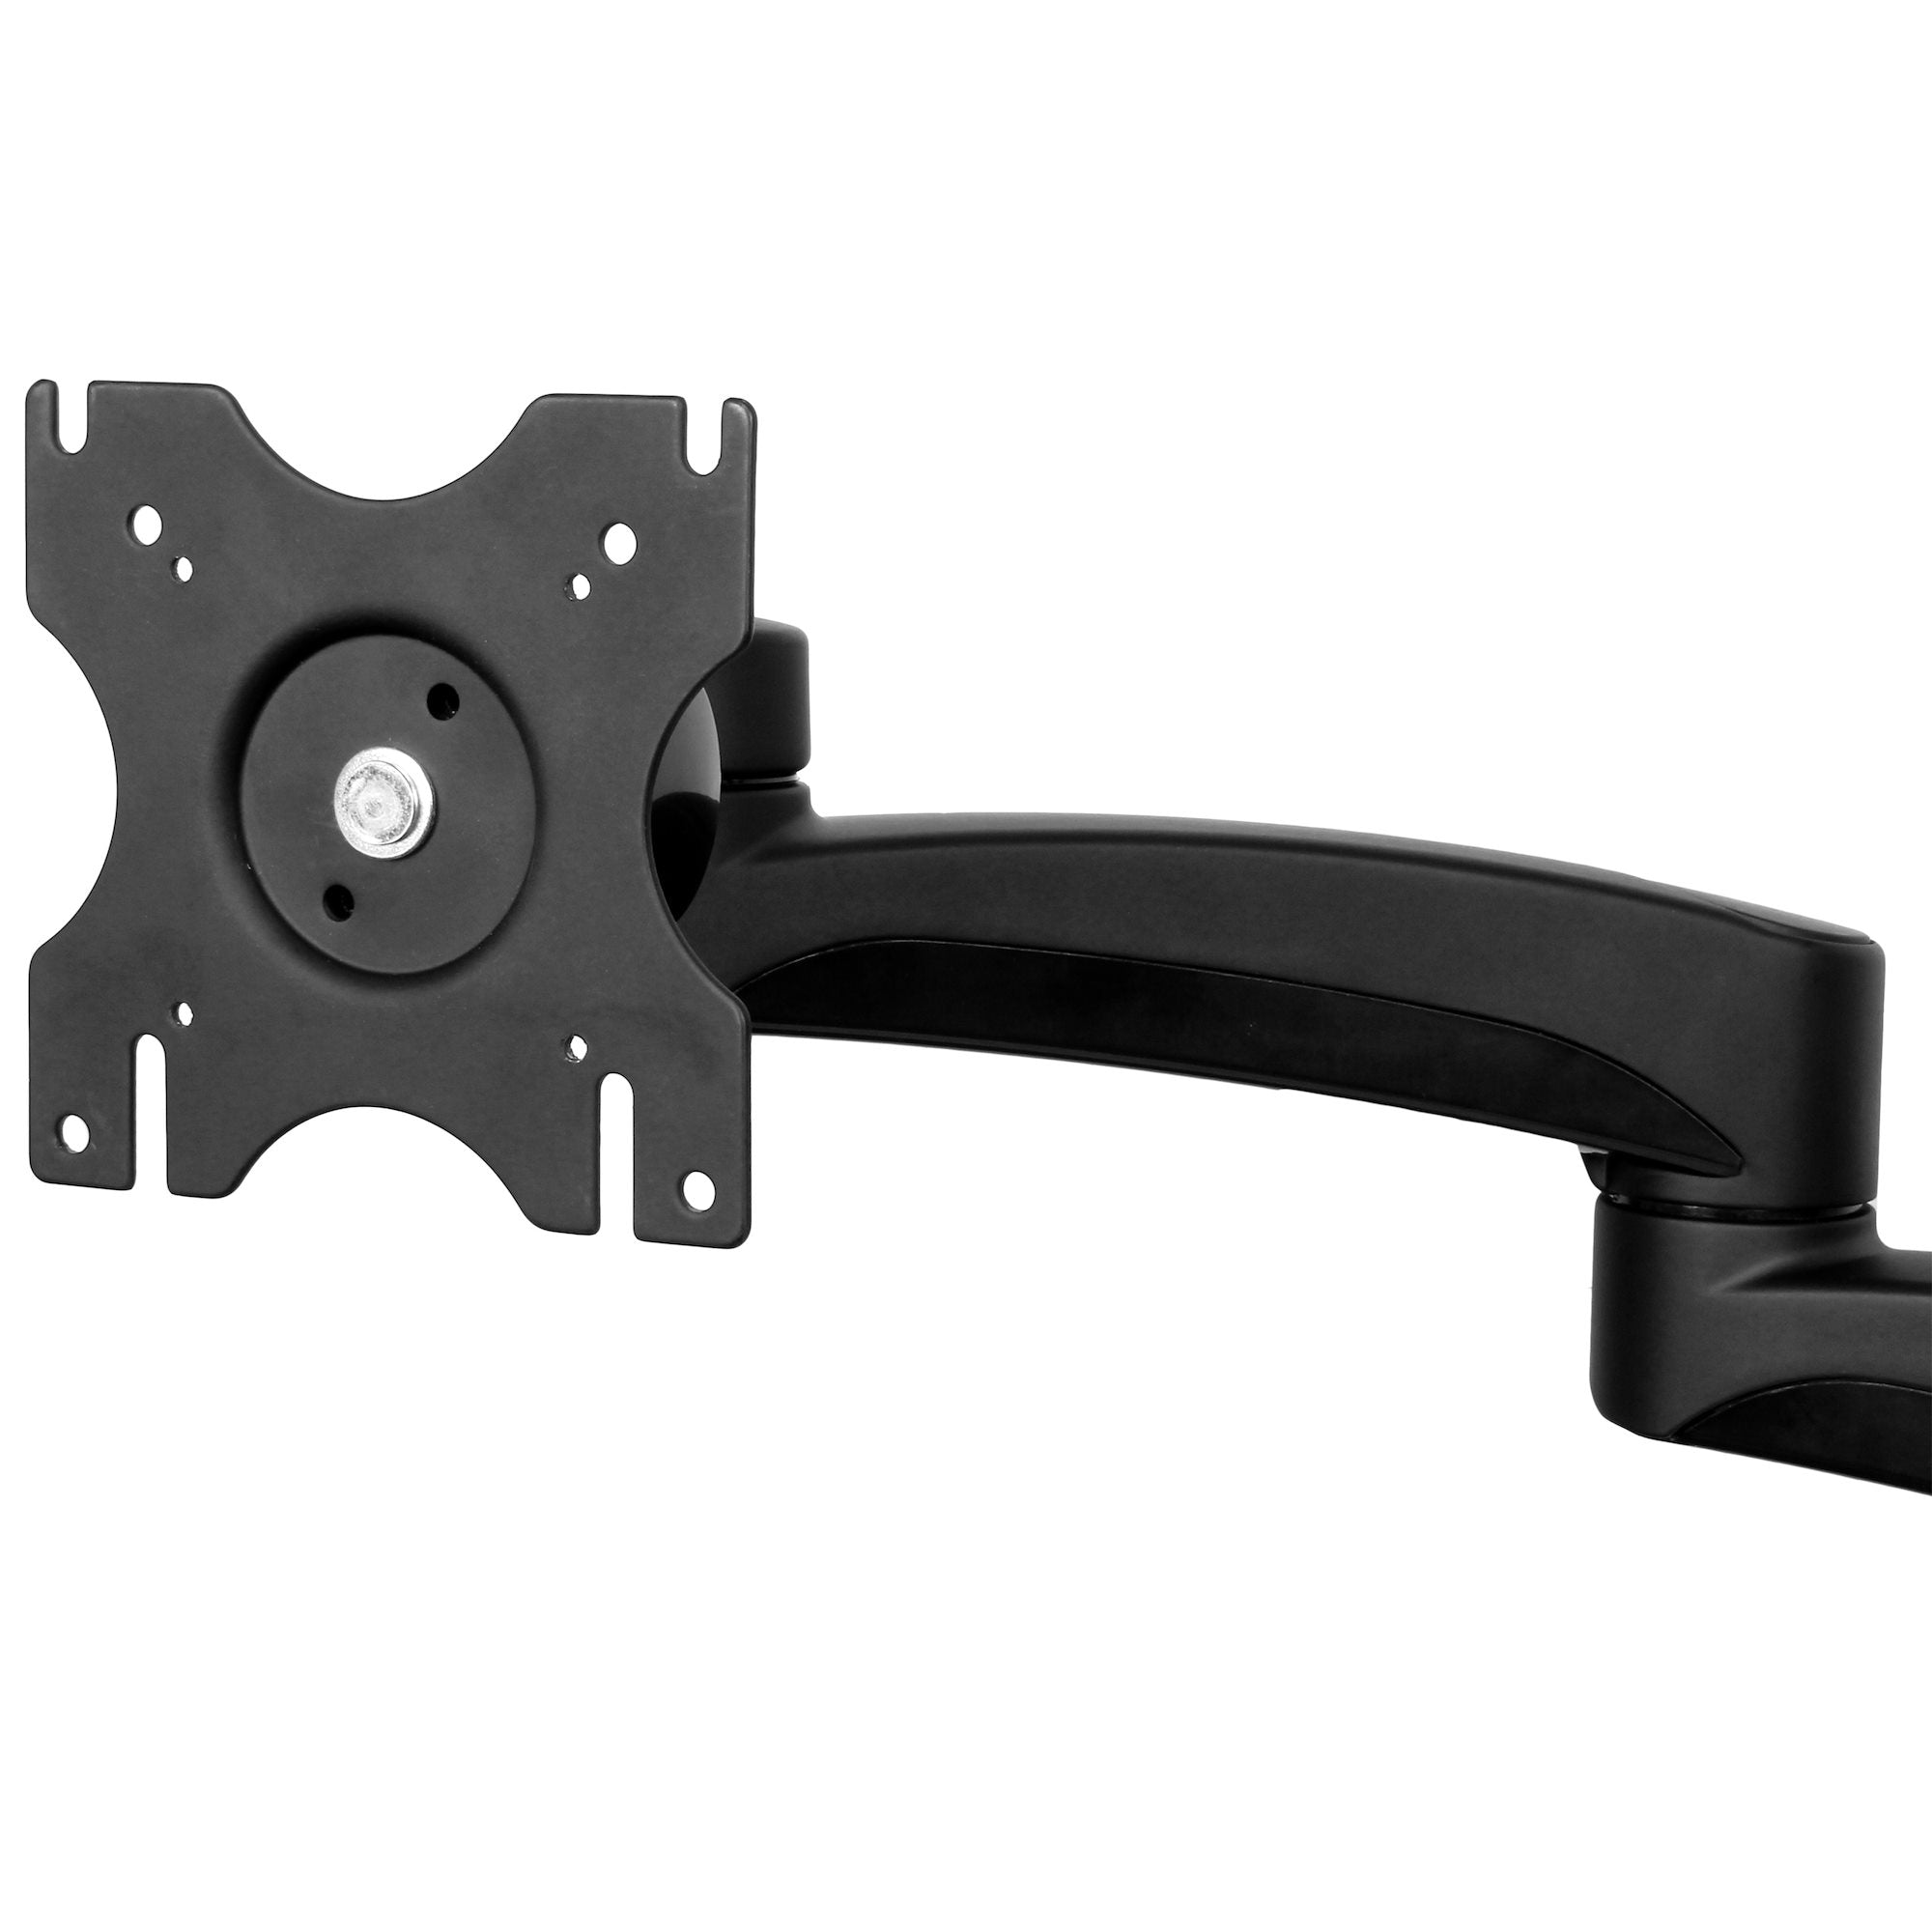 StartTech Dual Clamp-on Monitor Arm, Black - Preowned